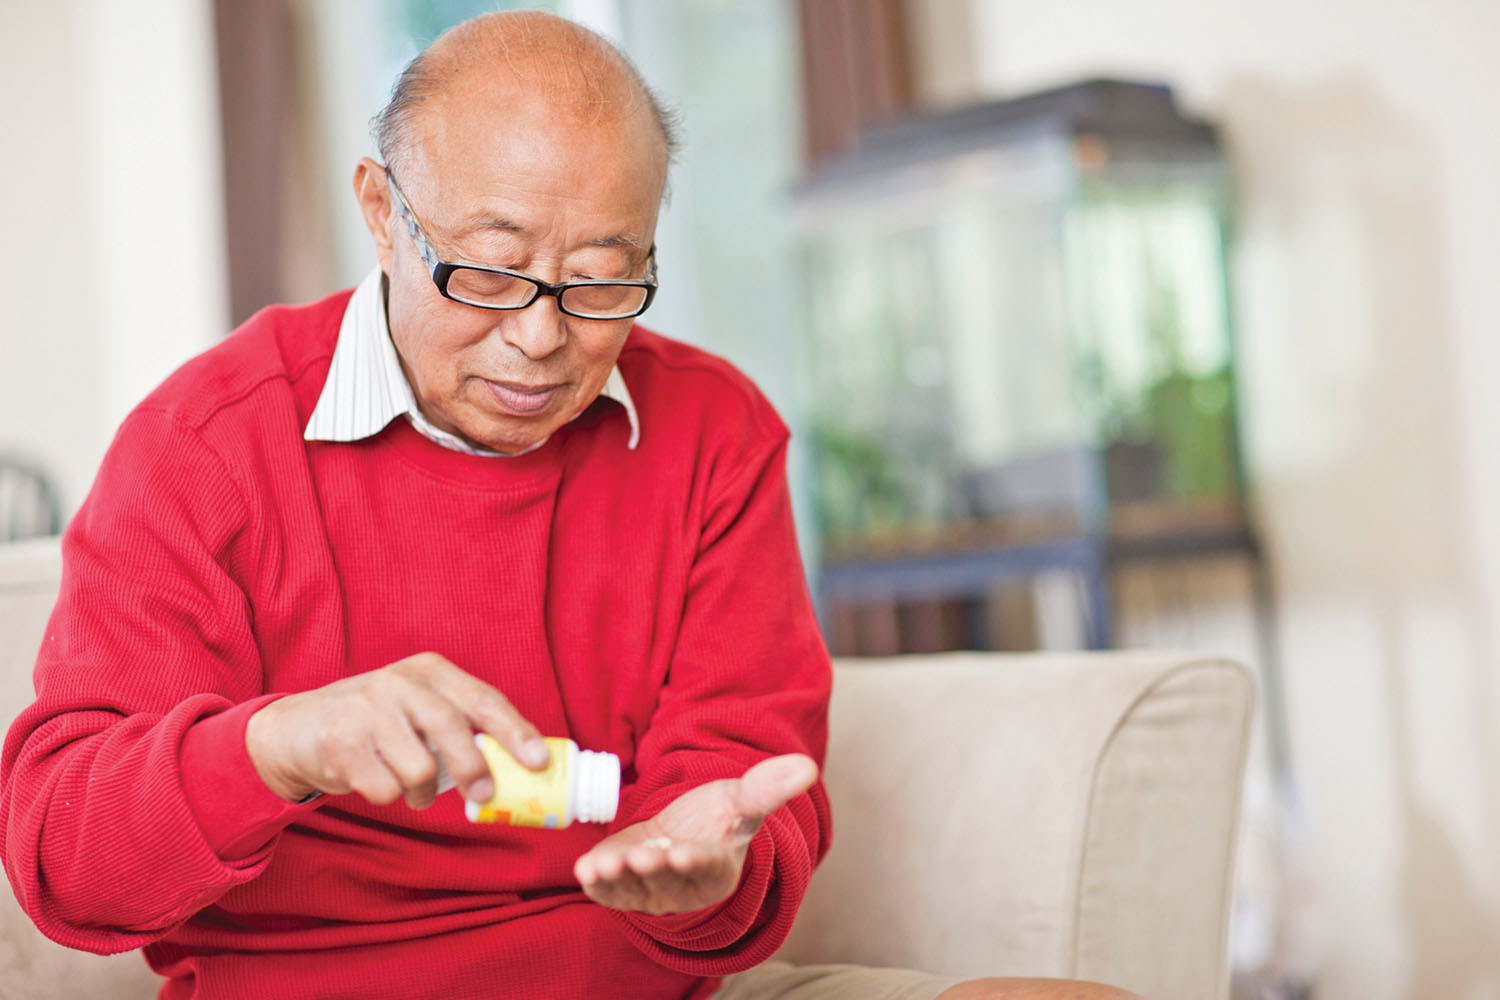 photo of an older man holding a bottle of pills and tipping one out into his hand